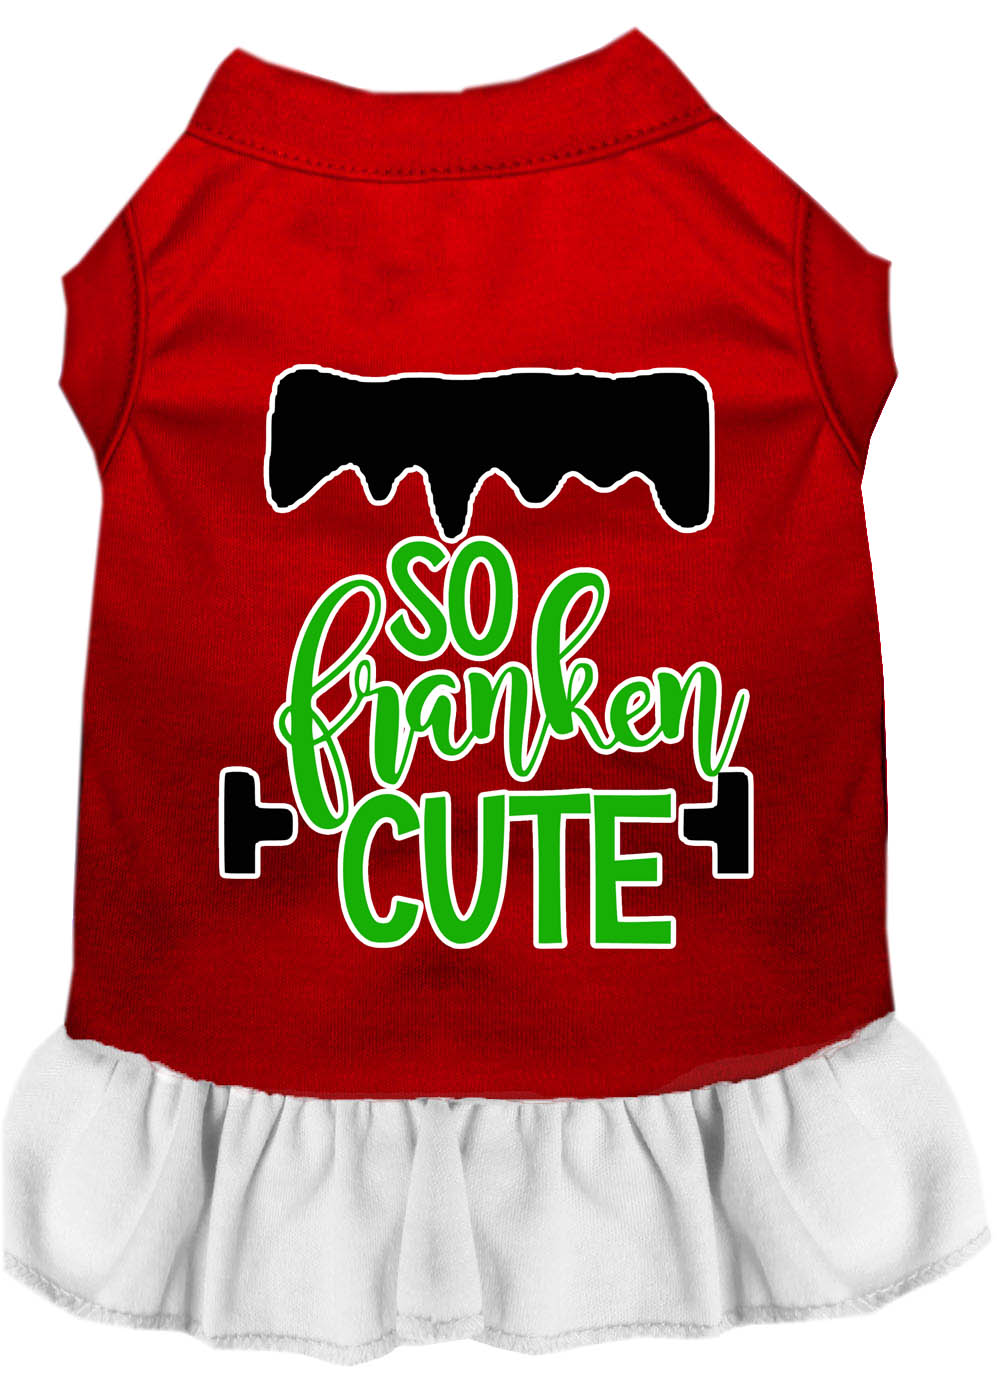 So Franken Cute Screen Print Dog Dress Red with White Lg